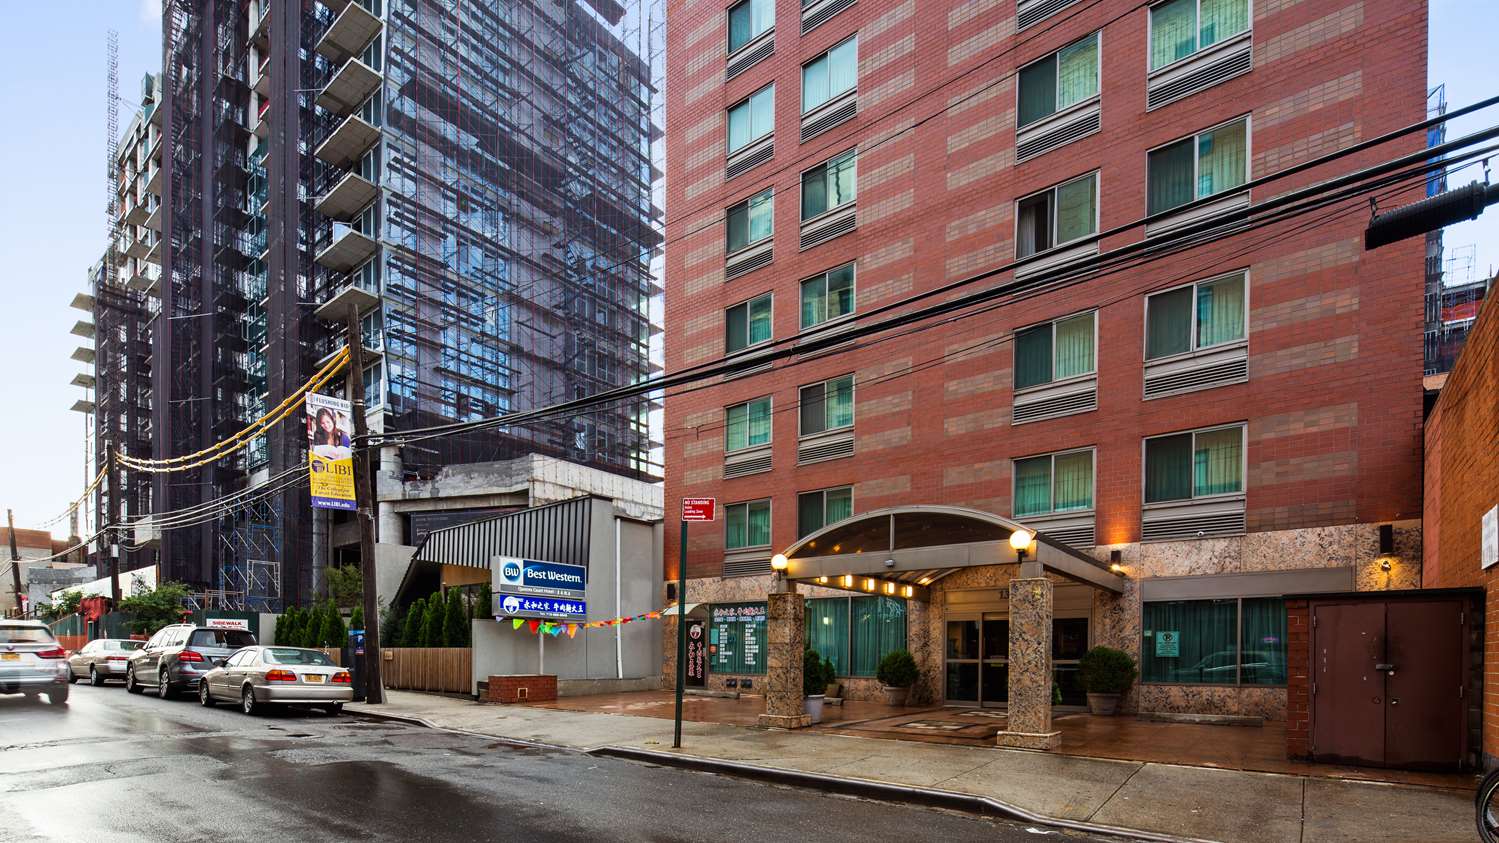 Queens Court Hotel - New York - Flushing - United States